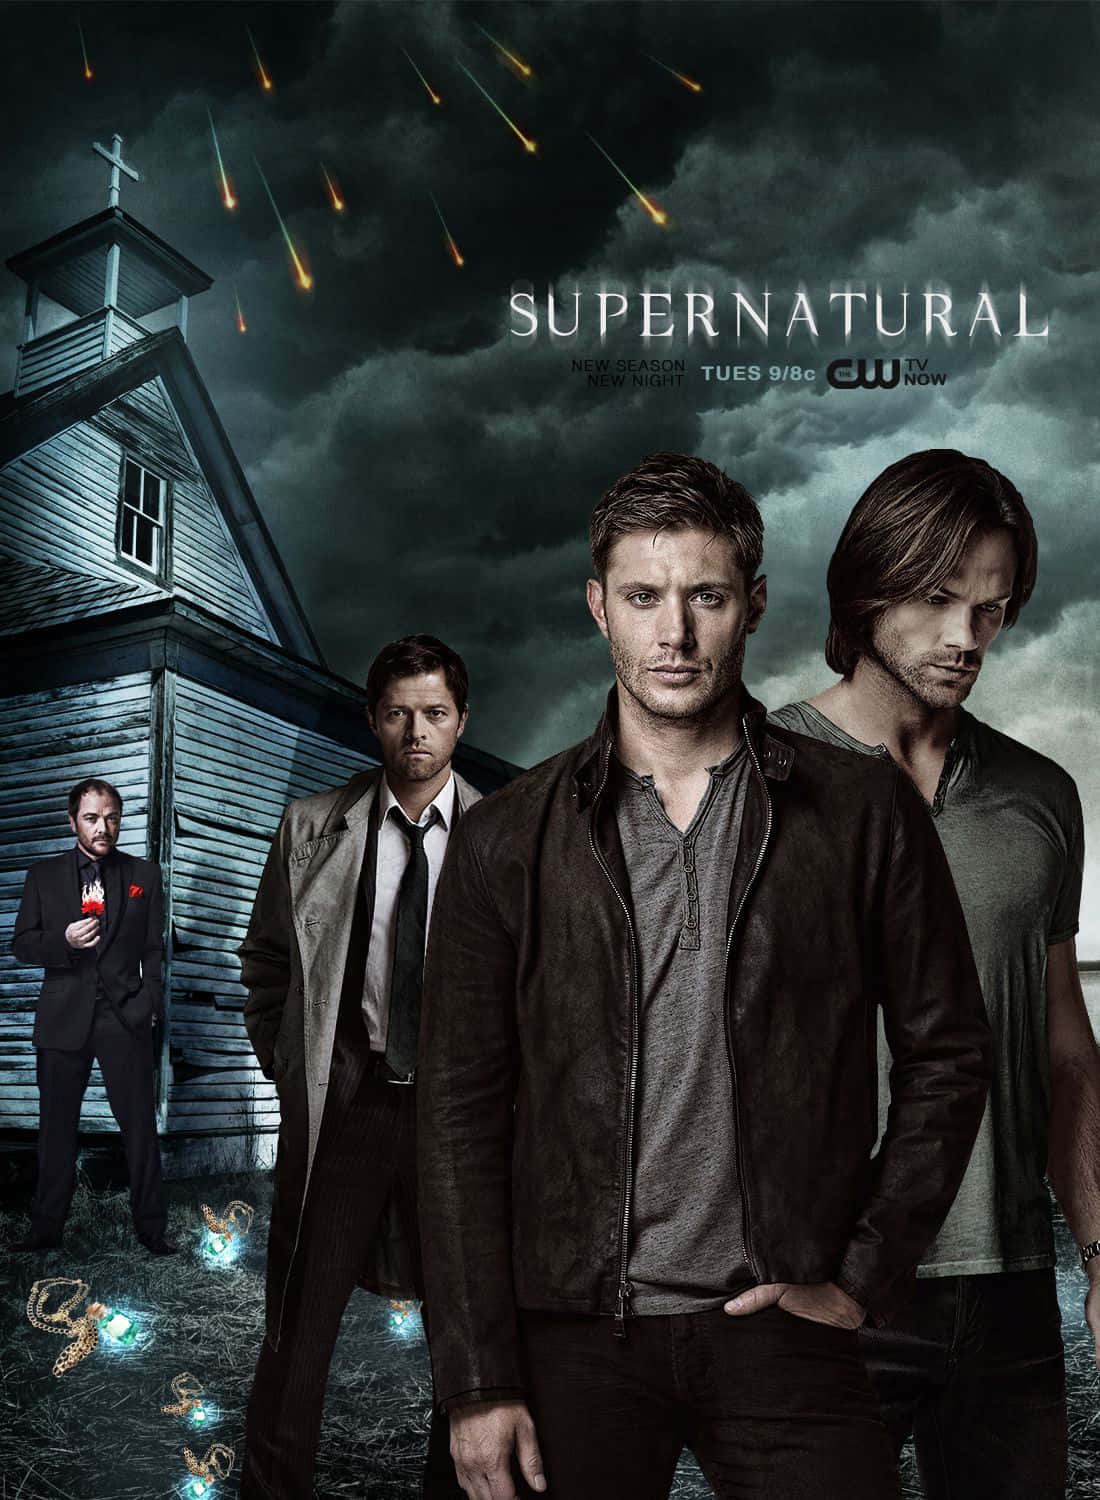 Hunting monsters with monster hunting experts: Sam and Dean Winchester